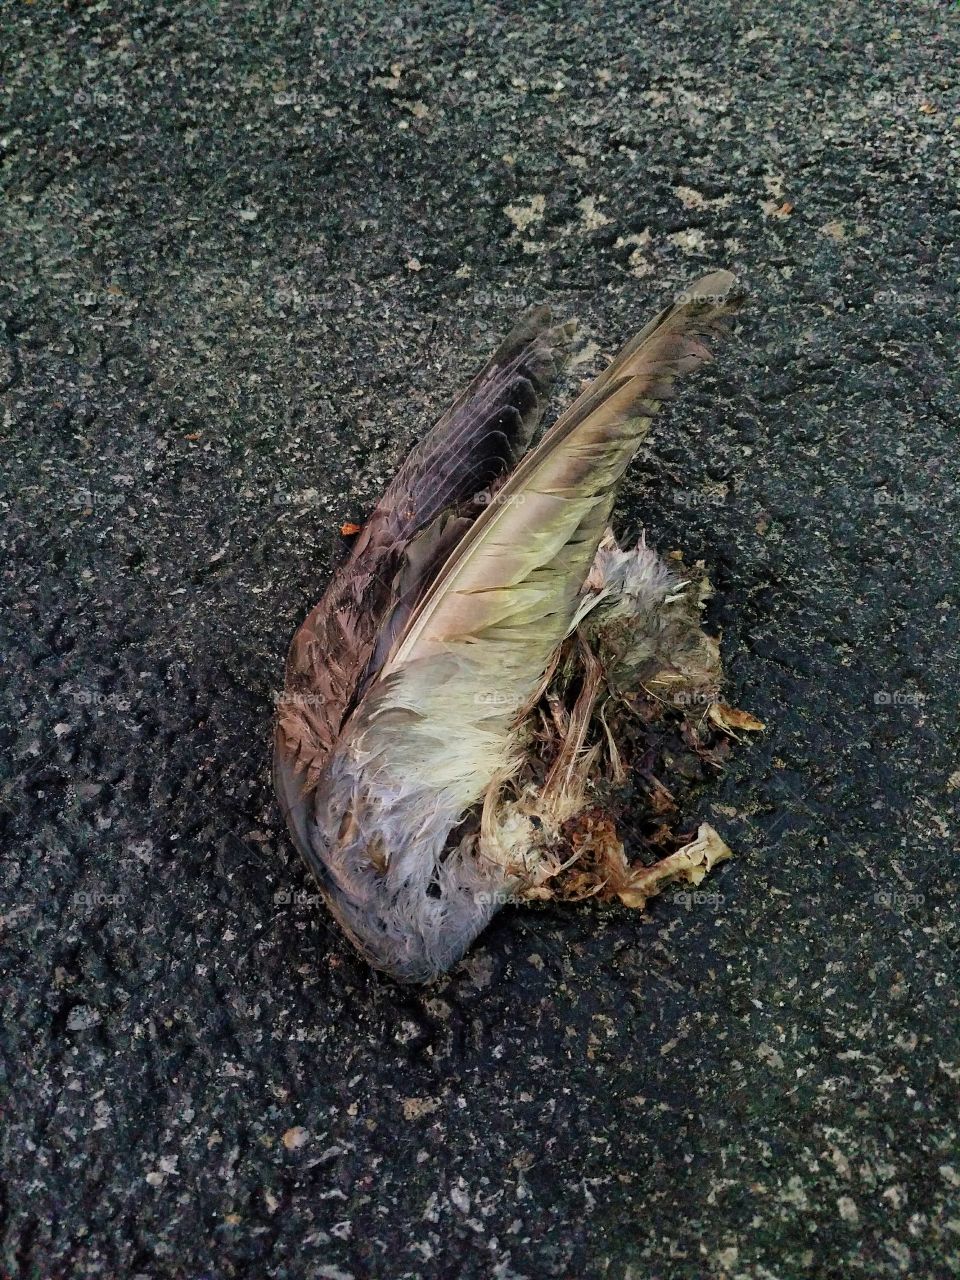 A dead bird I found in the parking lot